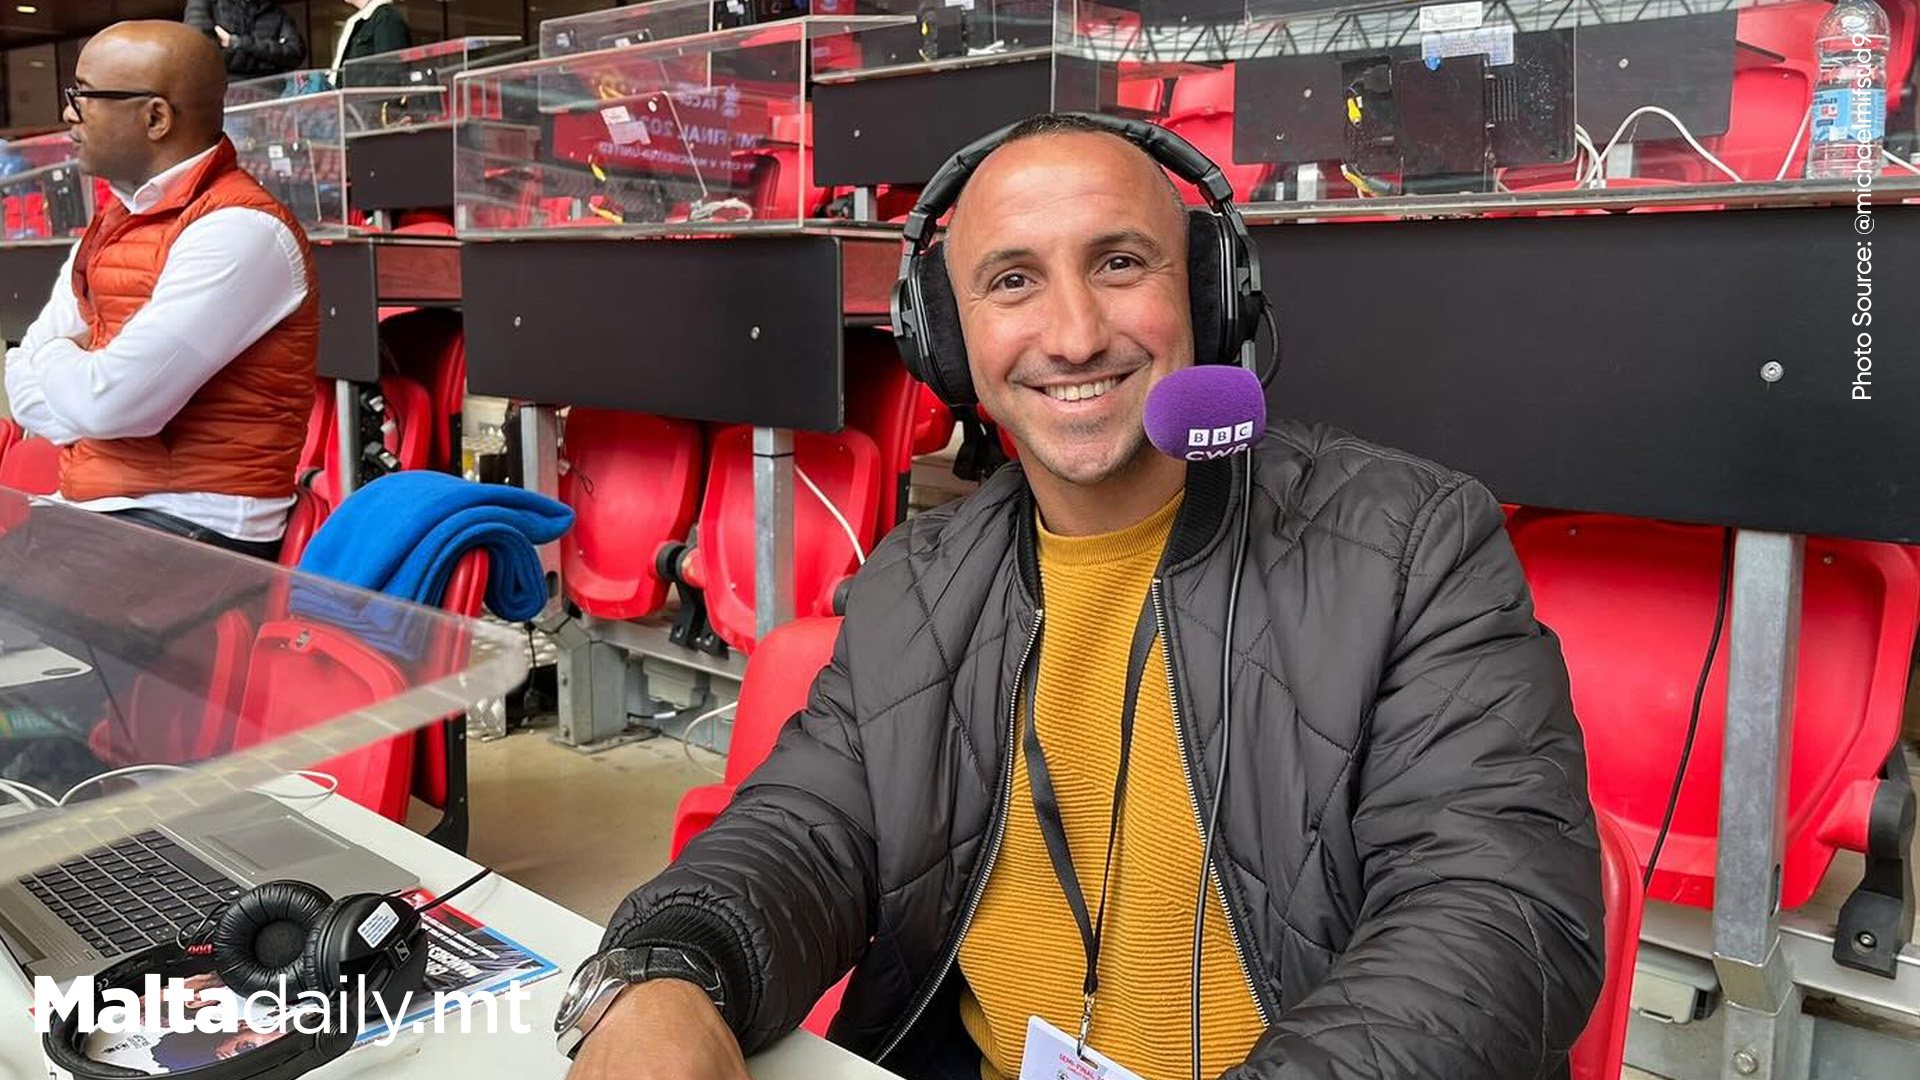 Maltese Football Legend Michael Mifsud Joins BBC CWR Commentary for Manchester United vs Coventry.